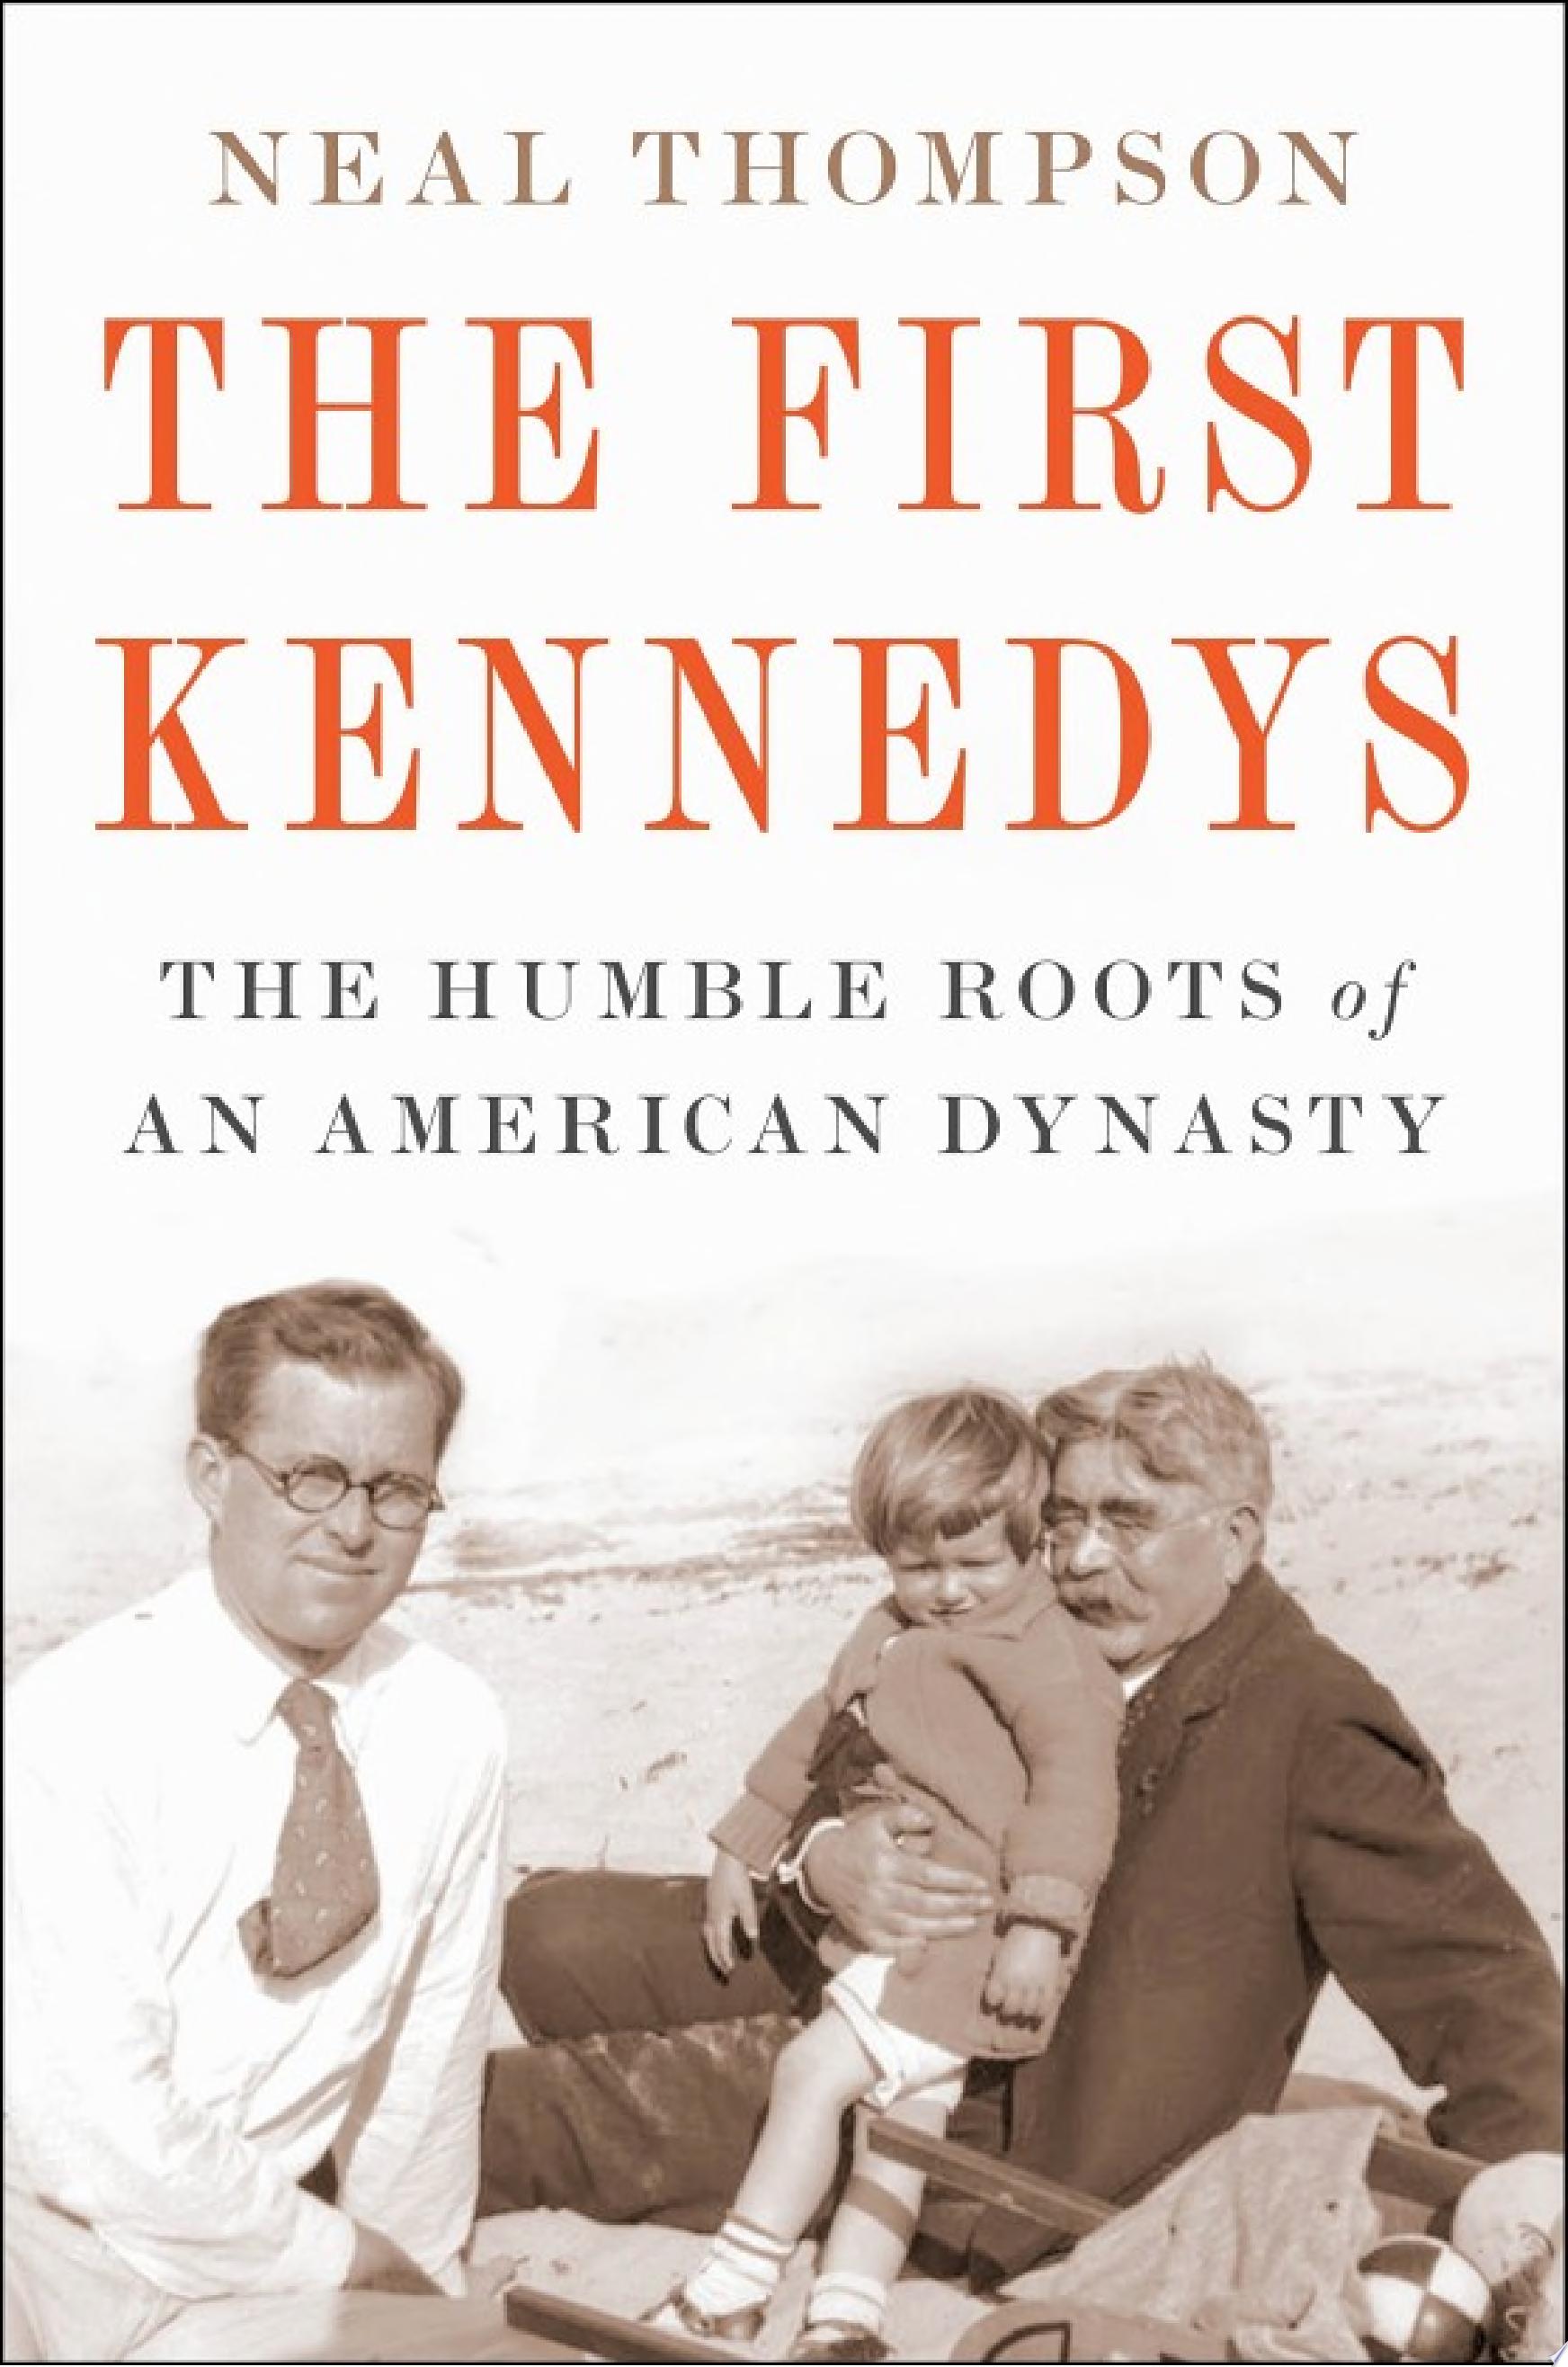 Image for "The First Kennedys"